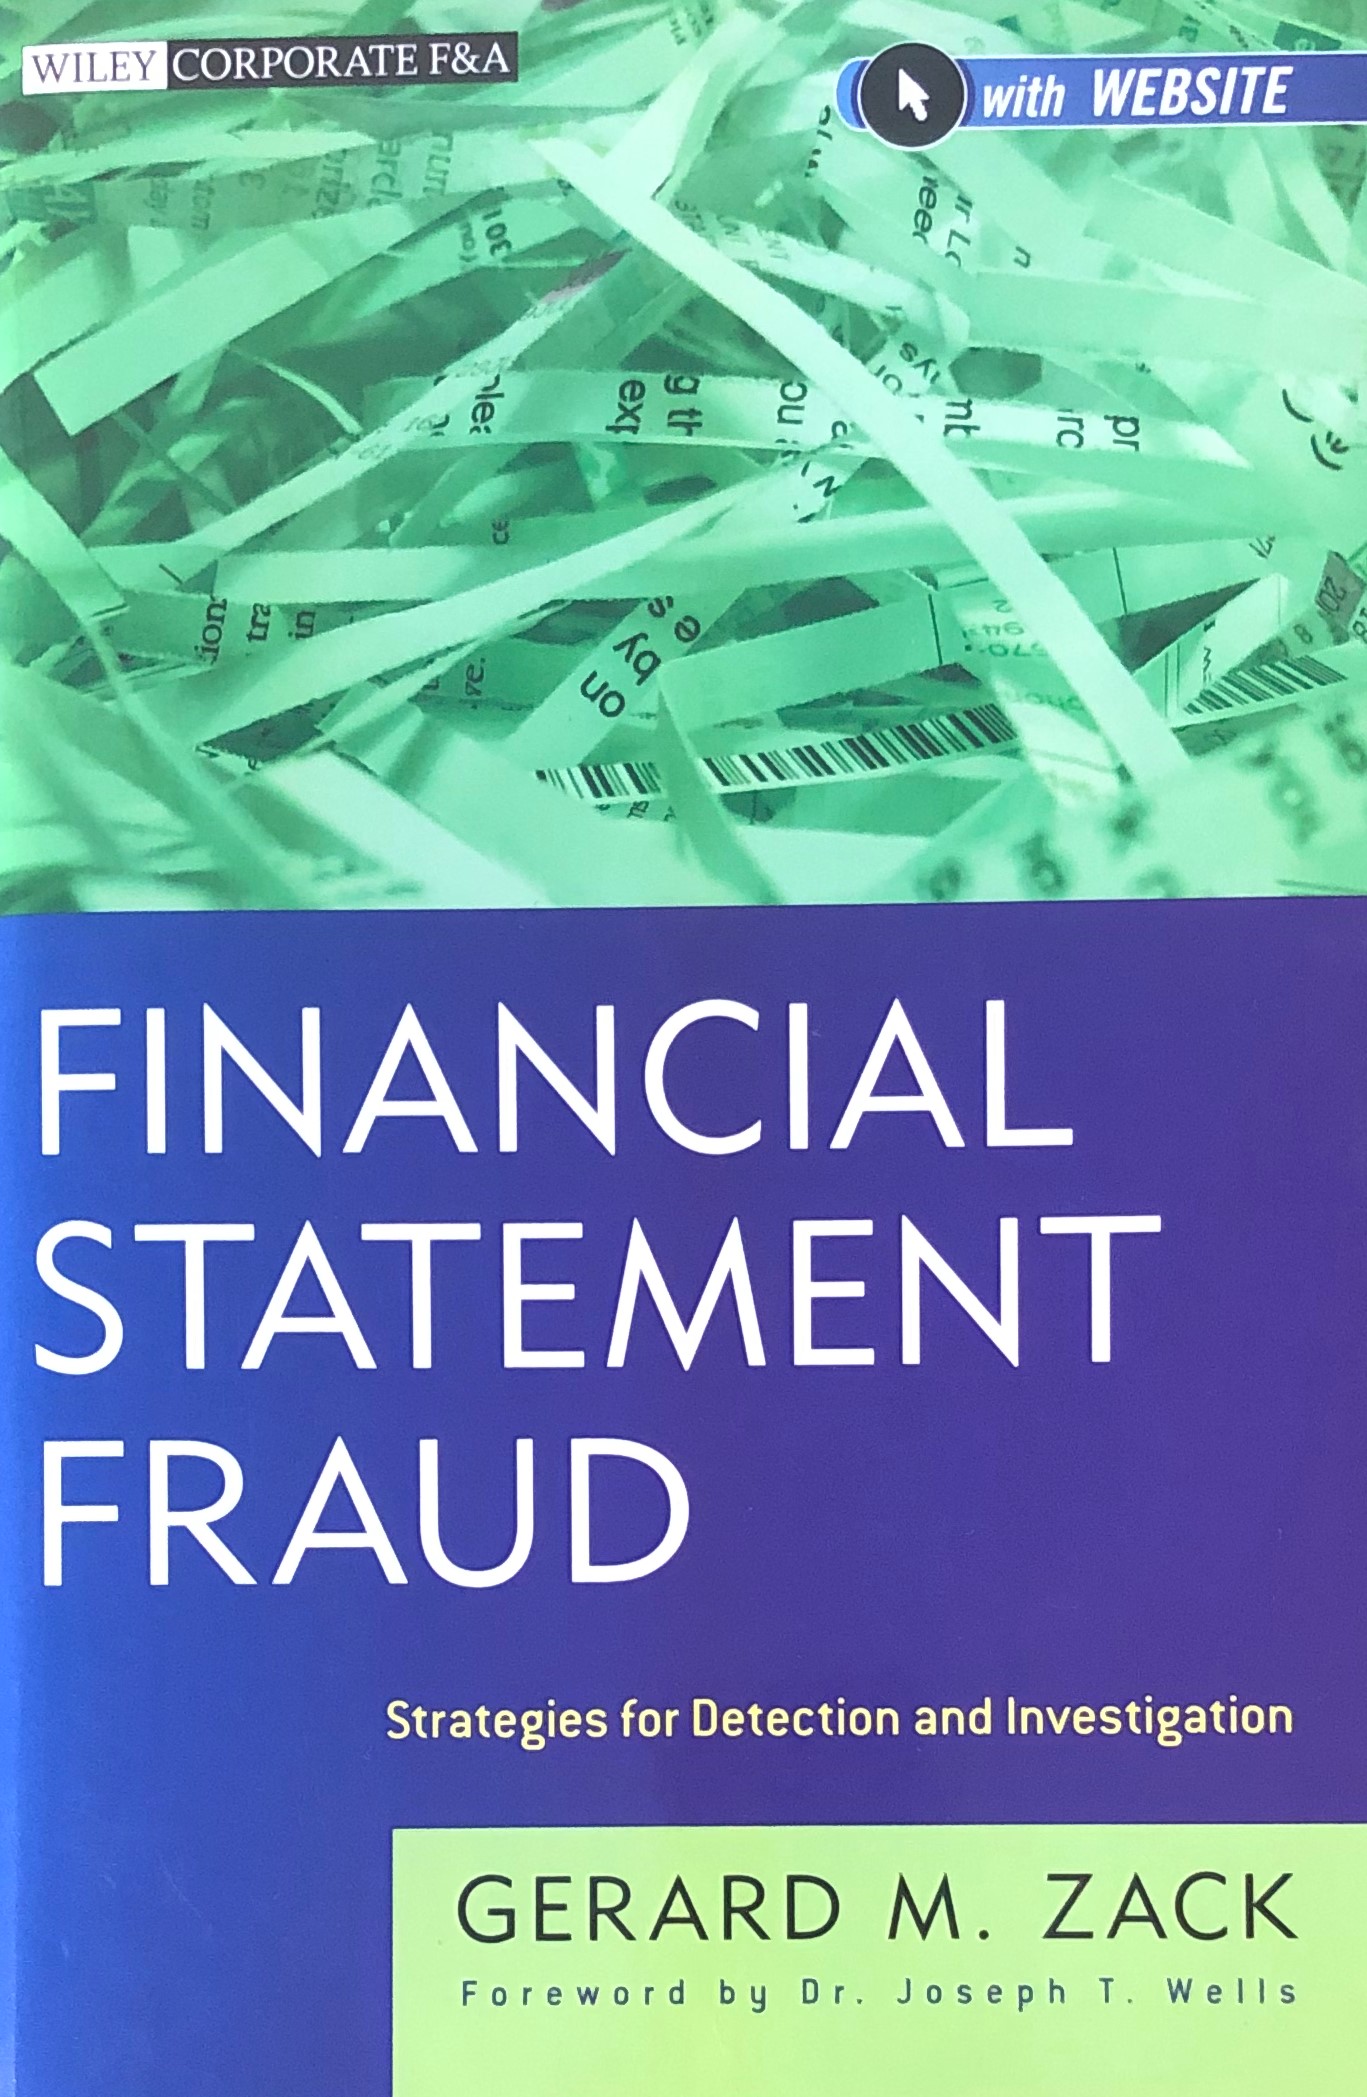 Description Financial Statement Fraud: Strategies for Detection and Investigation